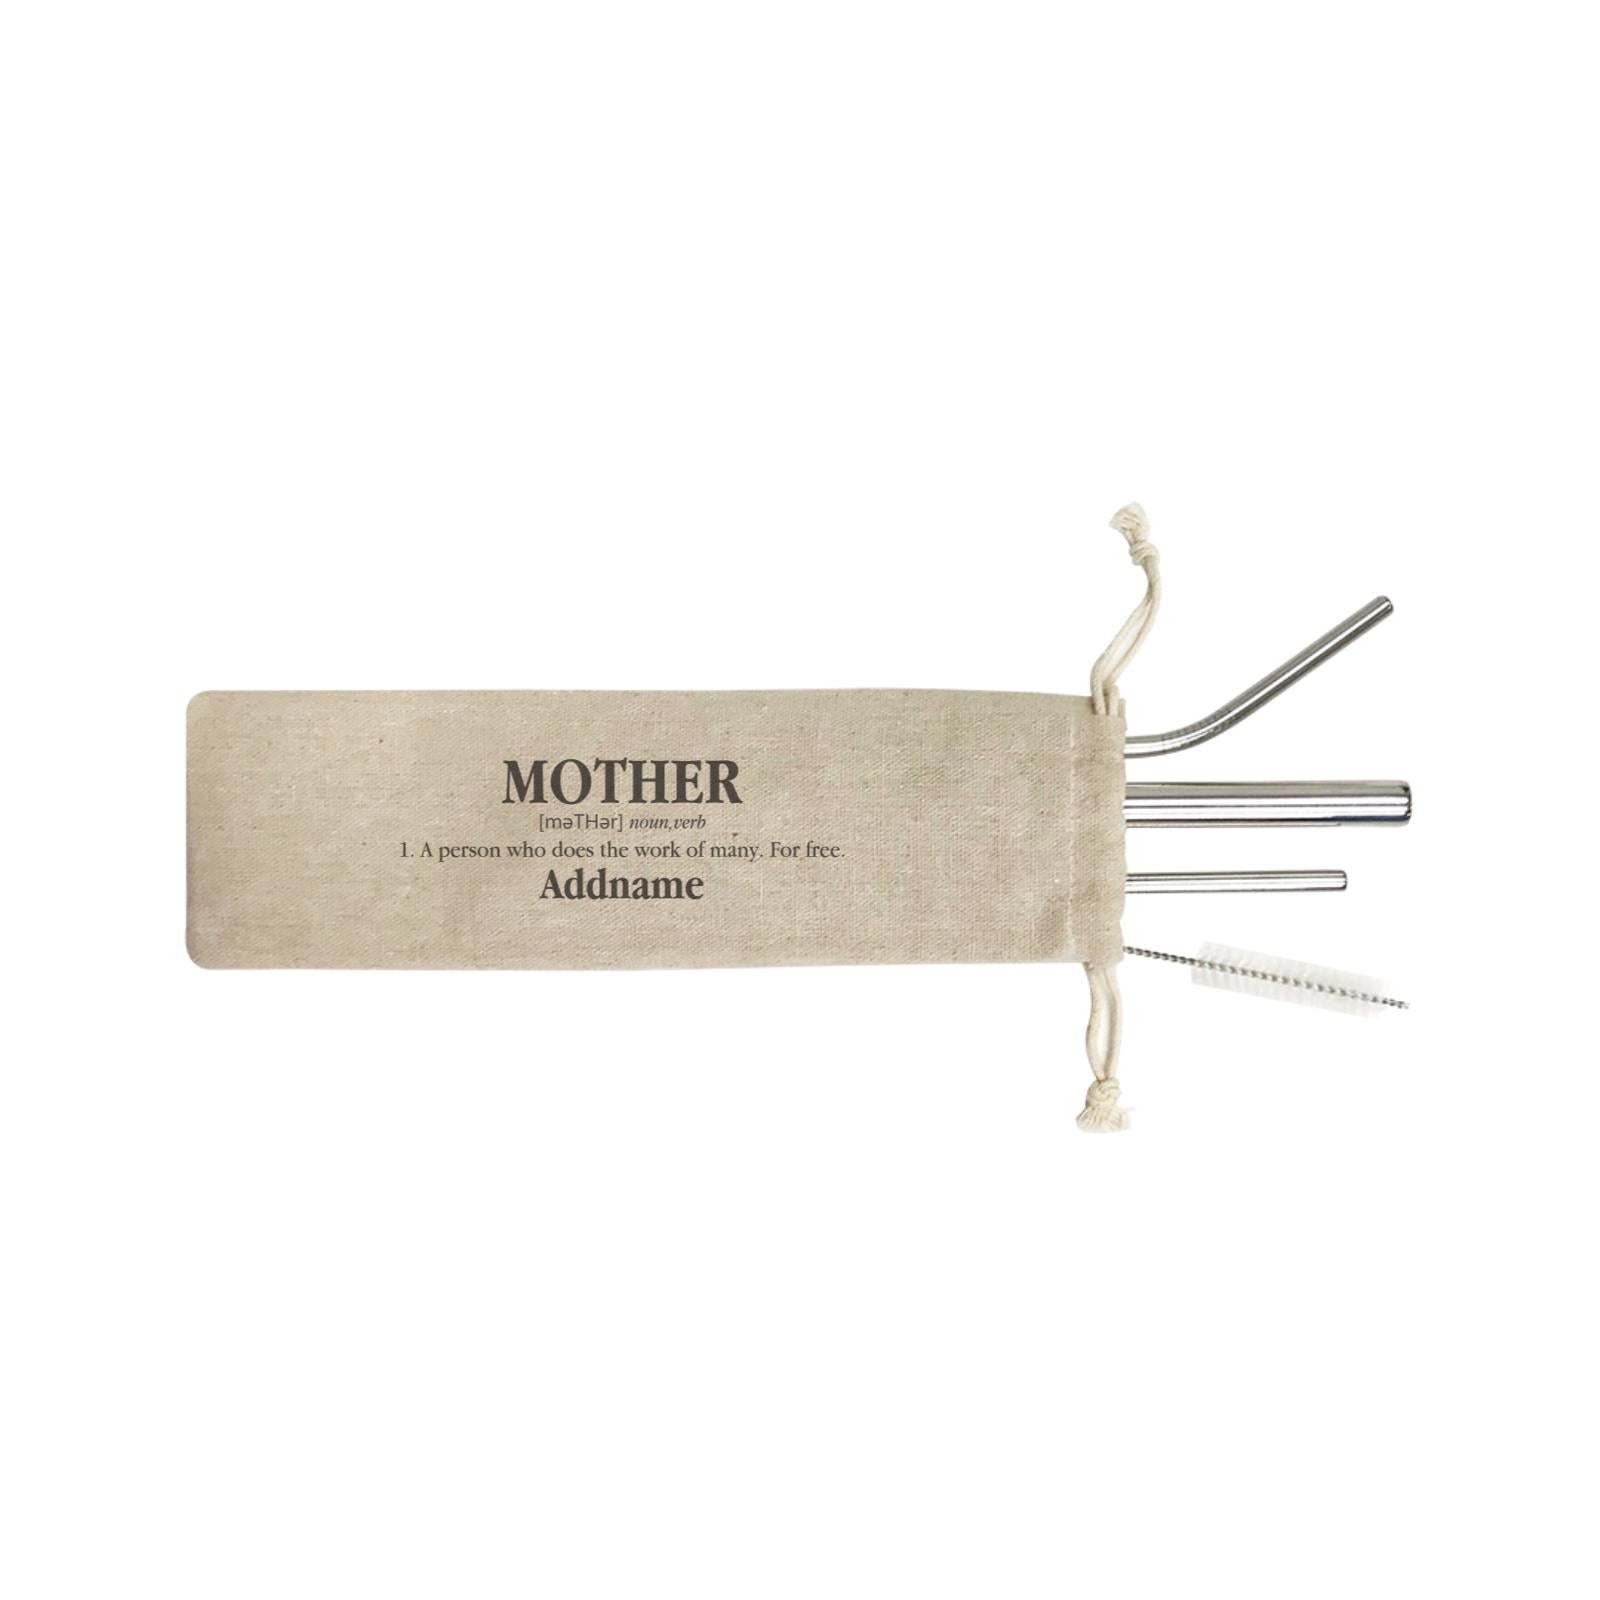 Funny Mom Quotes Mother Meaning A Person Who Does The Work Of Many For Free Addname SB 4-In-1 Stainless Steel Straw Set in Satchel